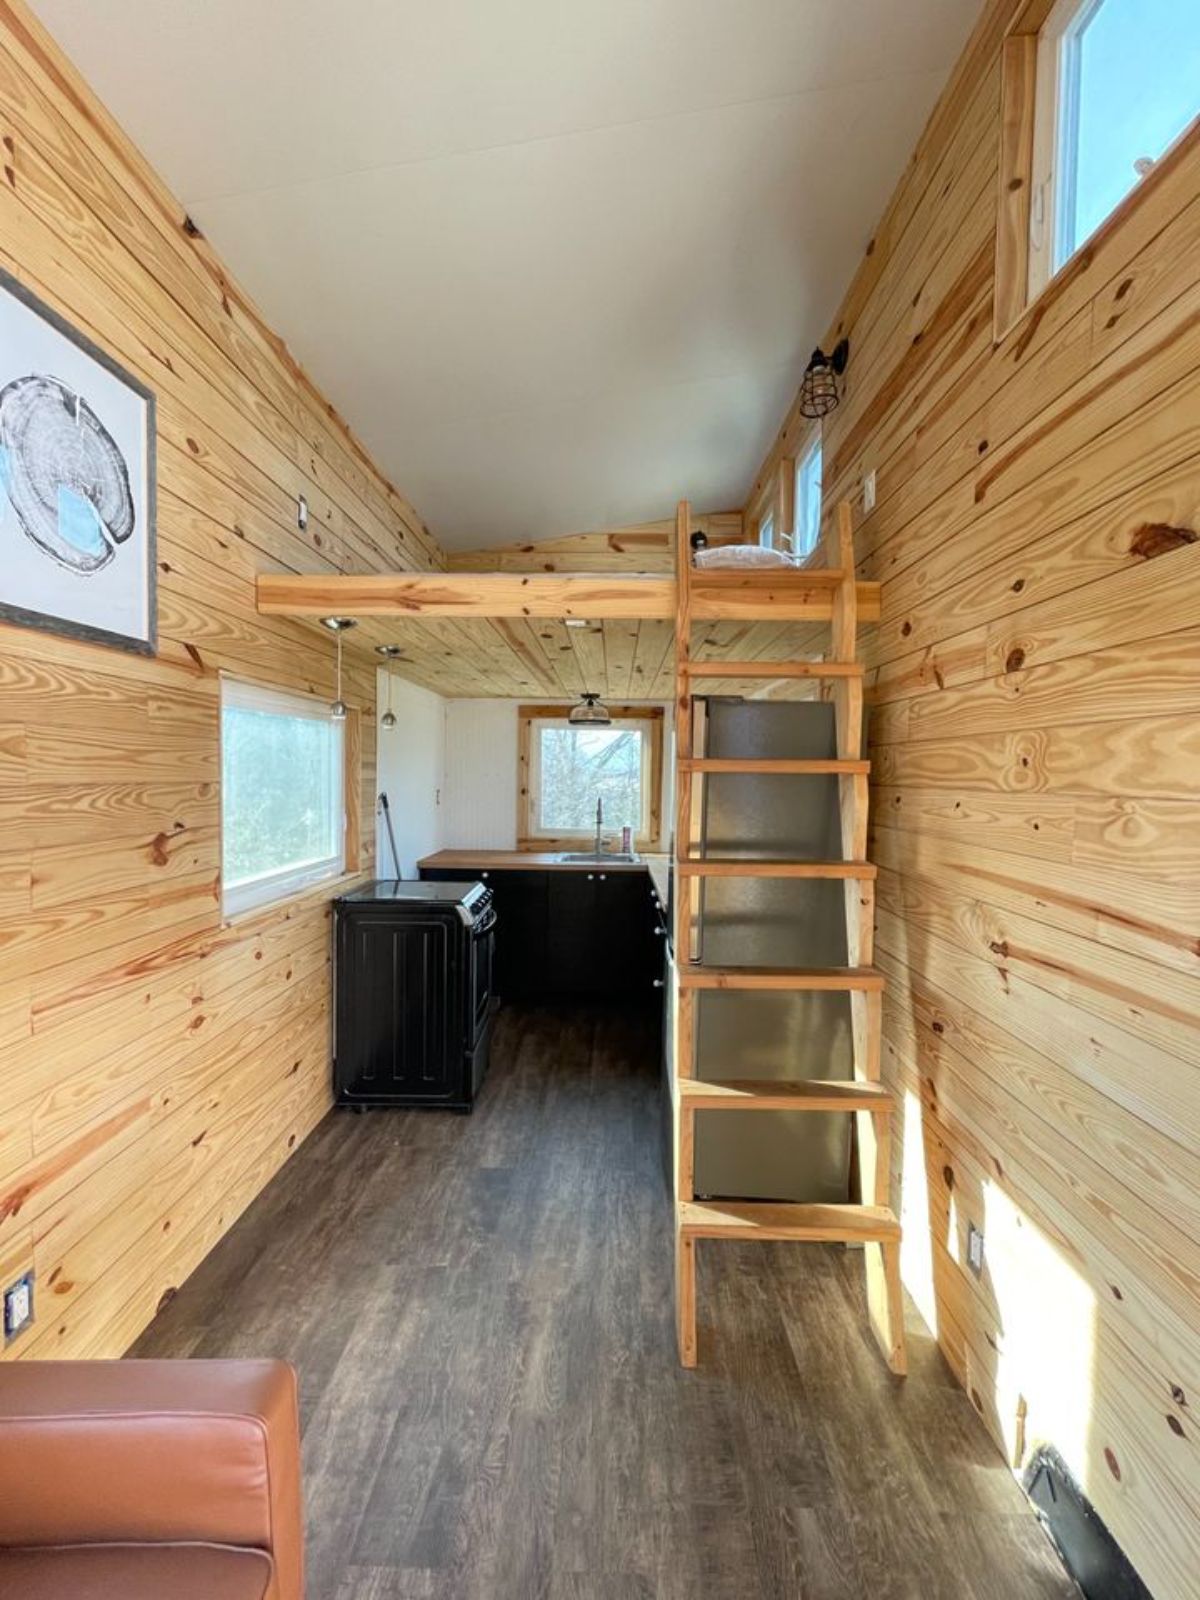 Master bedroom is accessible through the ladder